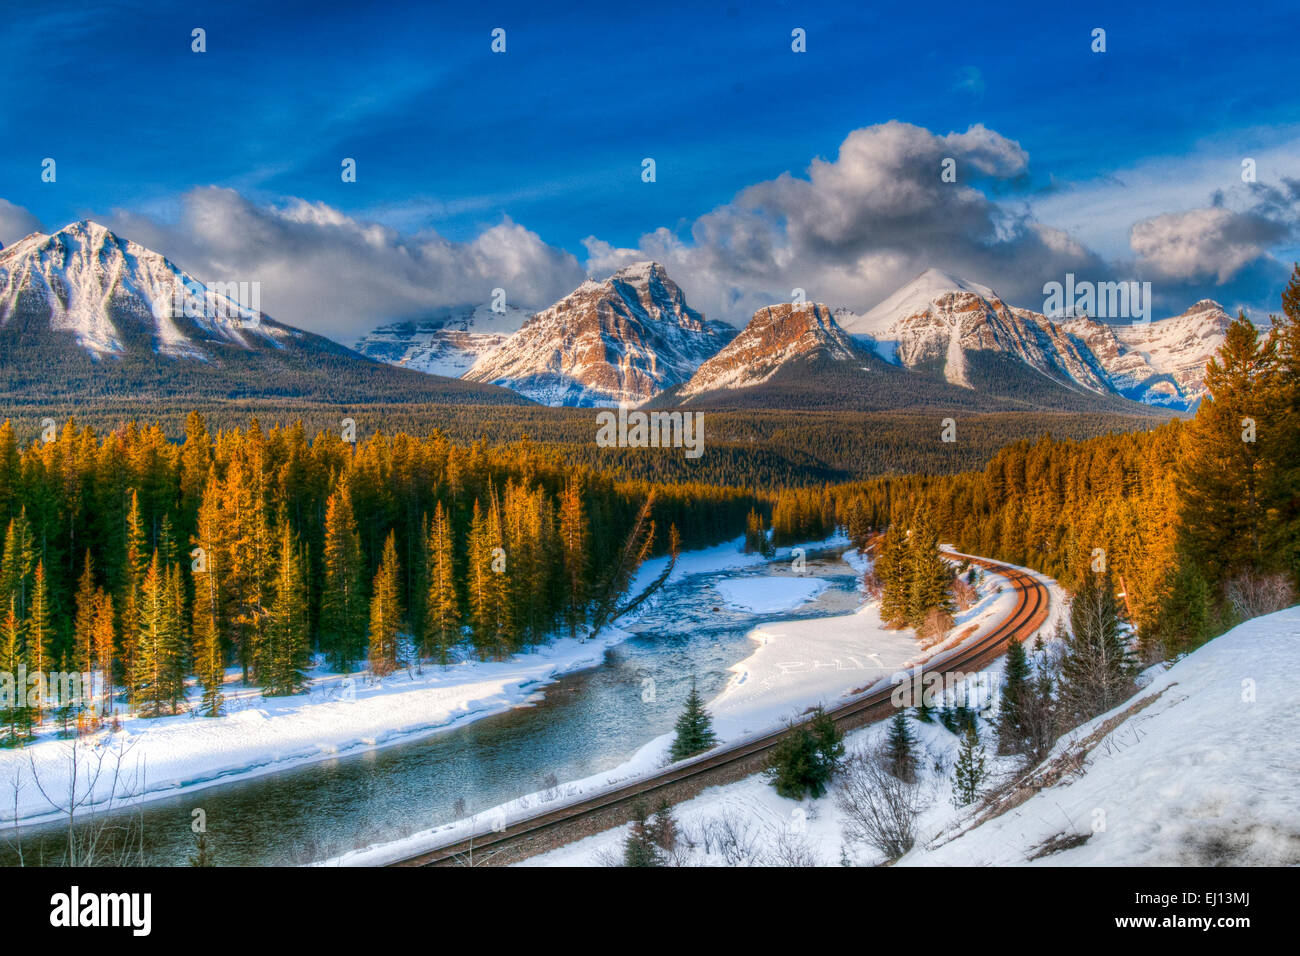 Scenic Morant's Curve on the Canadian Pacific Railway running along the Bow river in winter, Banff National Park, Alberta Canada Stock Photo